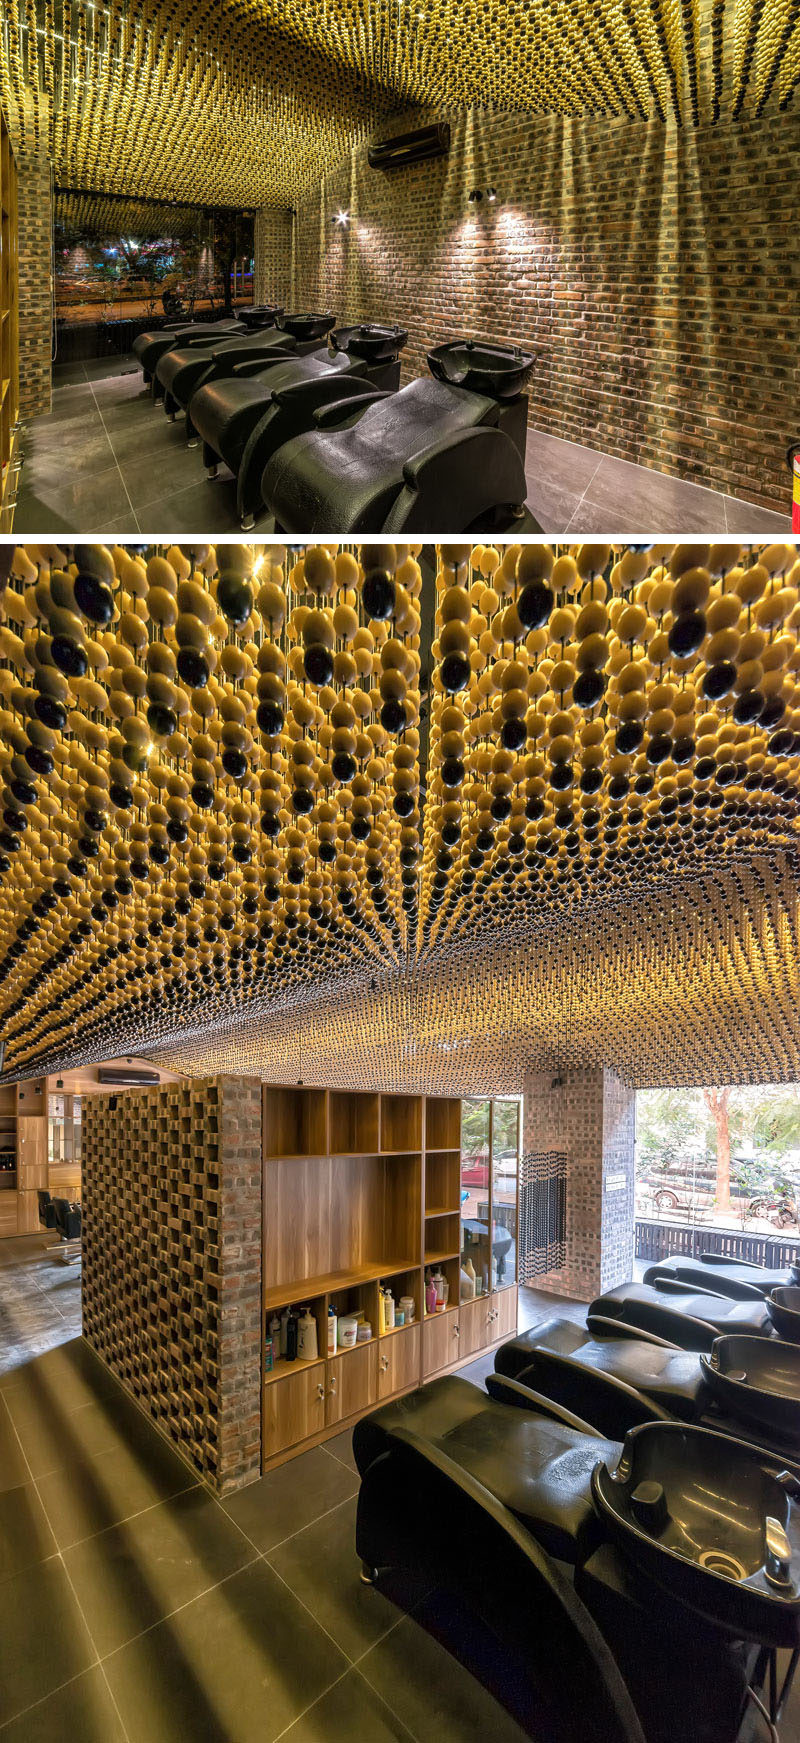 Ceiling Design Ideas - 200,000 Wood Beads Cover The Ceiling In This Hair Salon